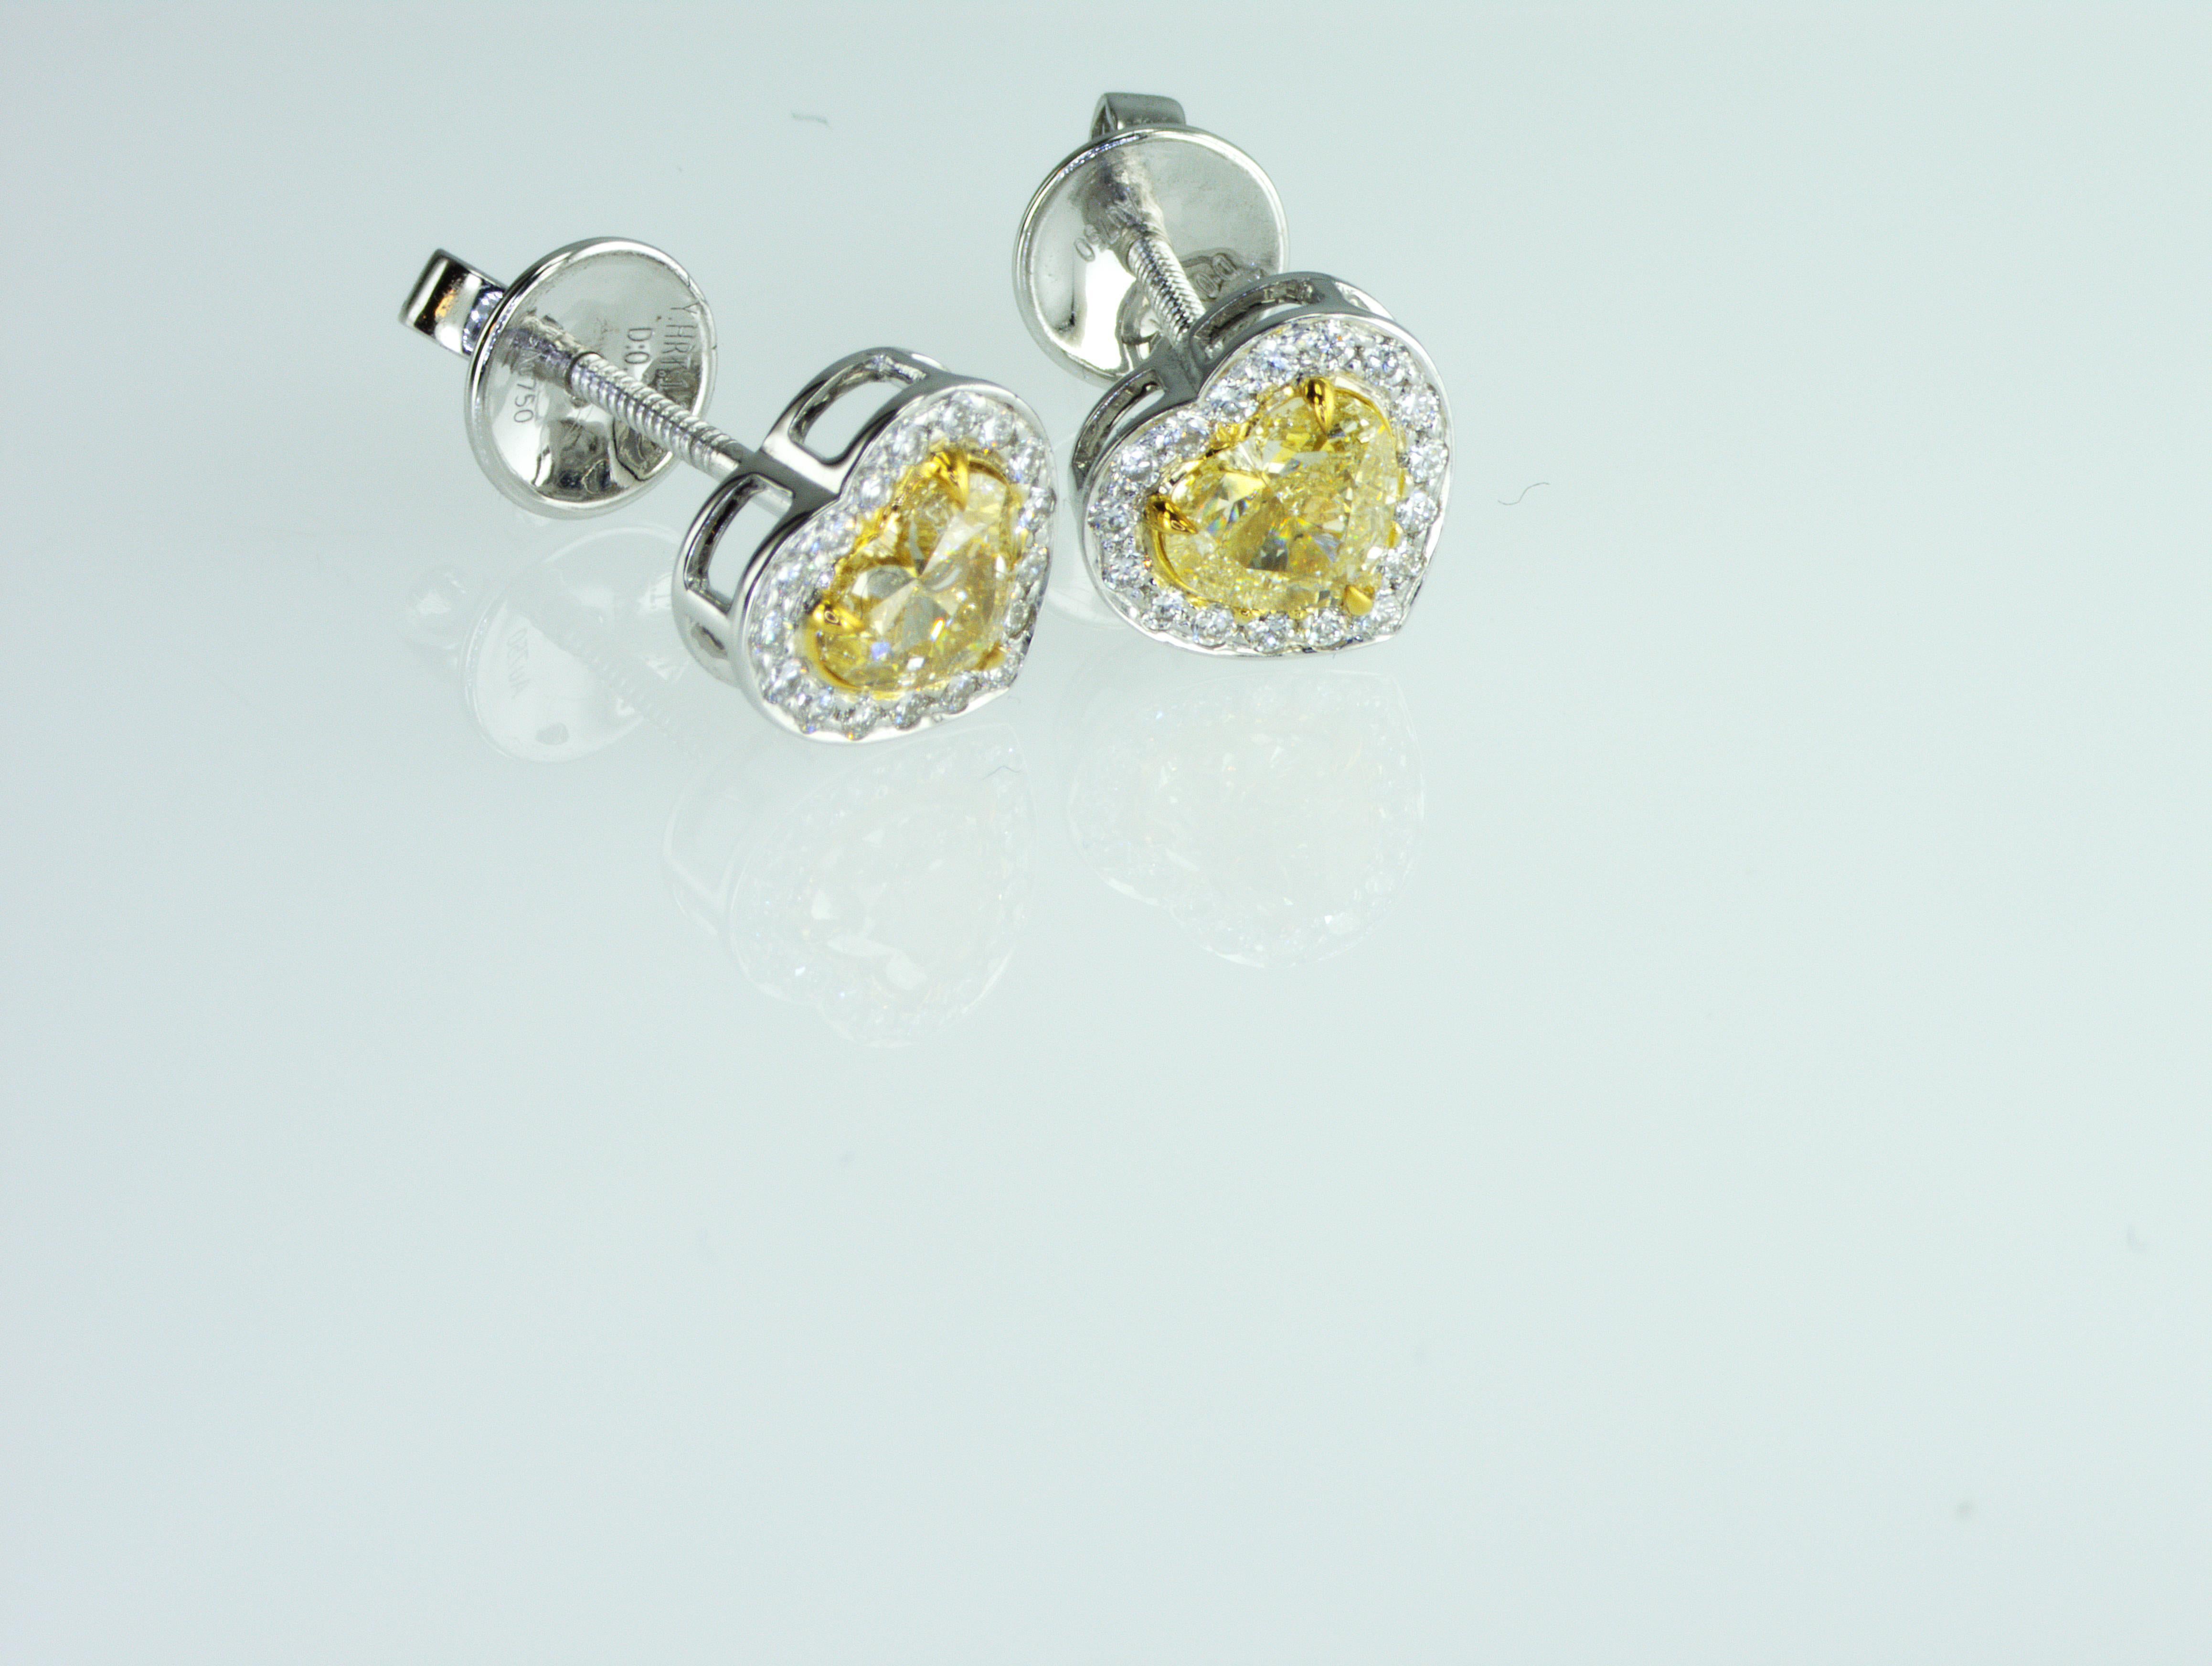 We are natural diamond production company located in Dubai.
Rare 1.42 carat Fancy Yellow Heart shape natural diamonds Earrings.
Total weight of natural diamonds is 1.42 carat. All our diamonds, jewelry and gemstones are certified by well known